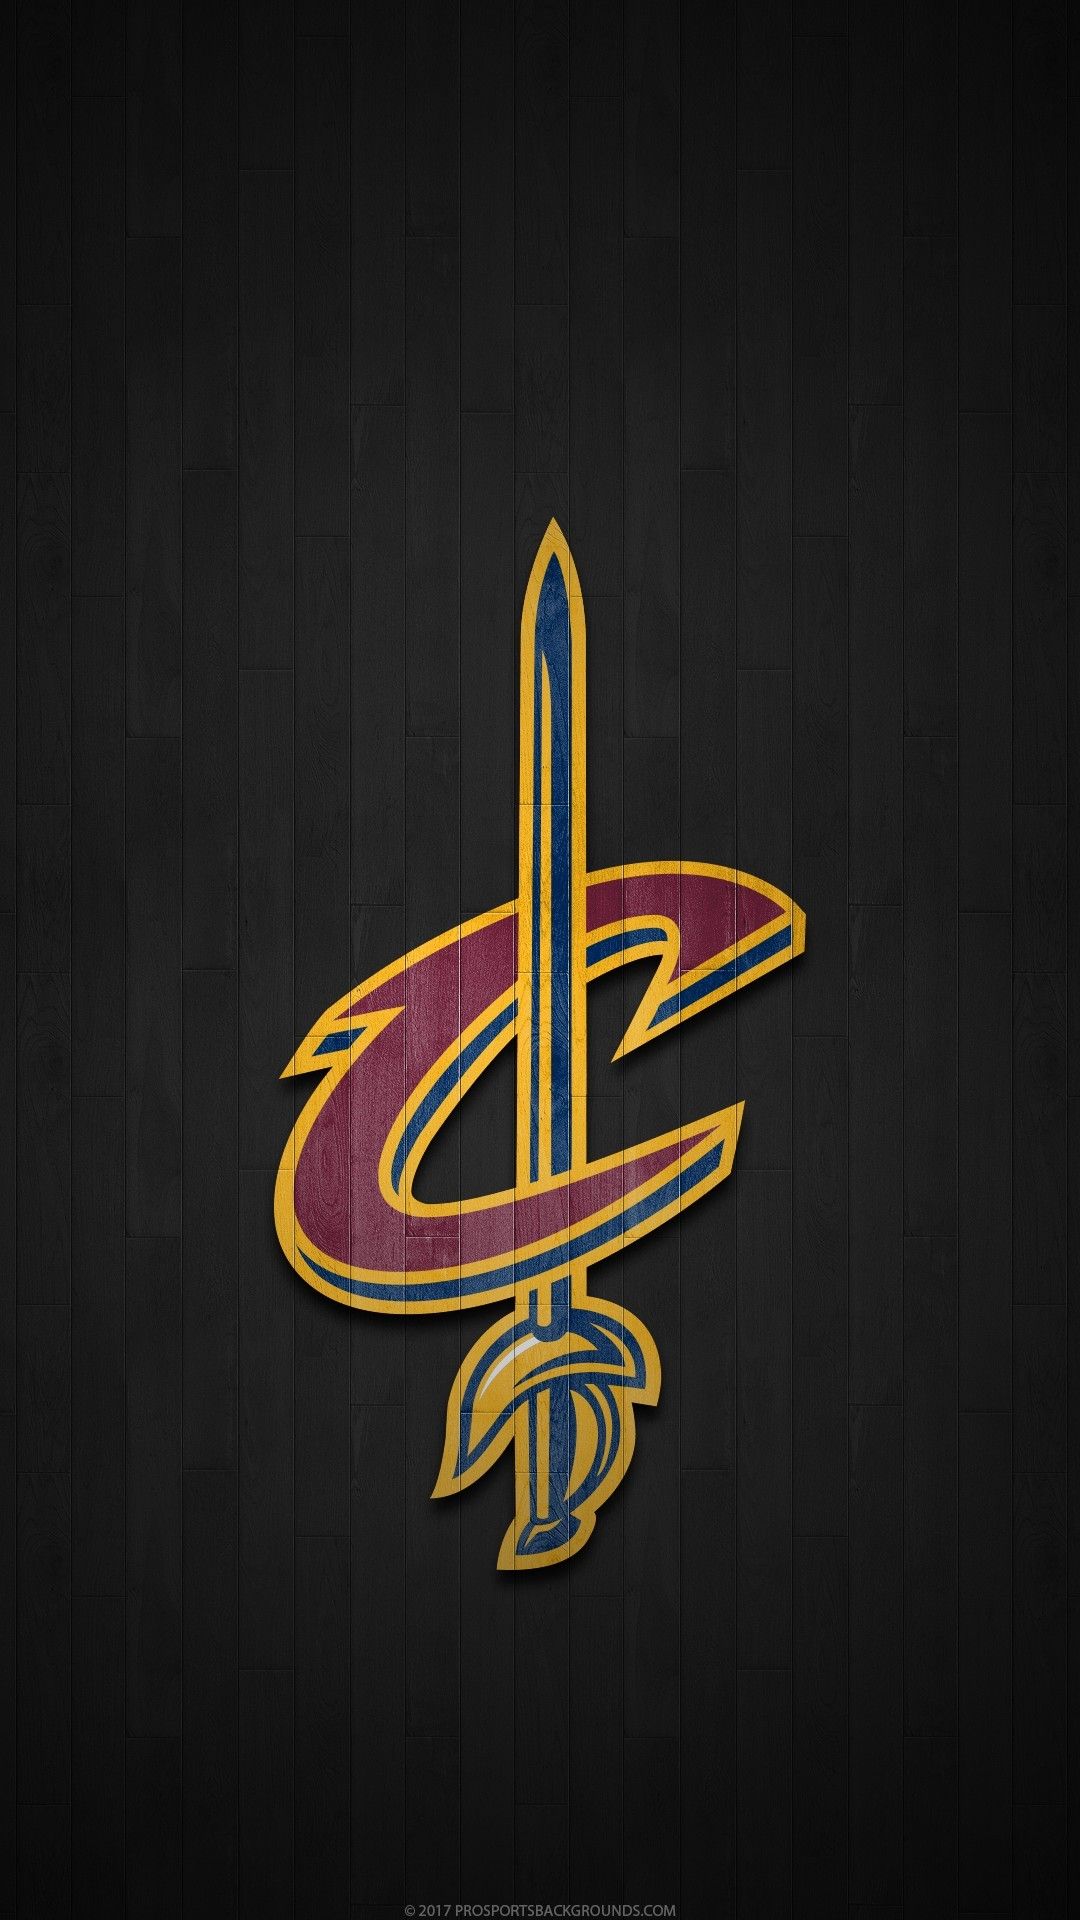 Cavs Iphone Wallpapers